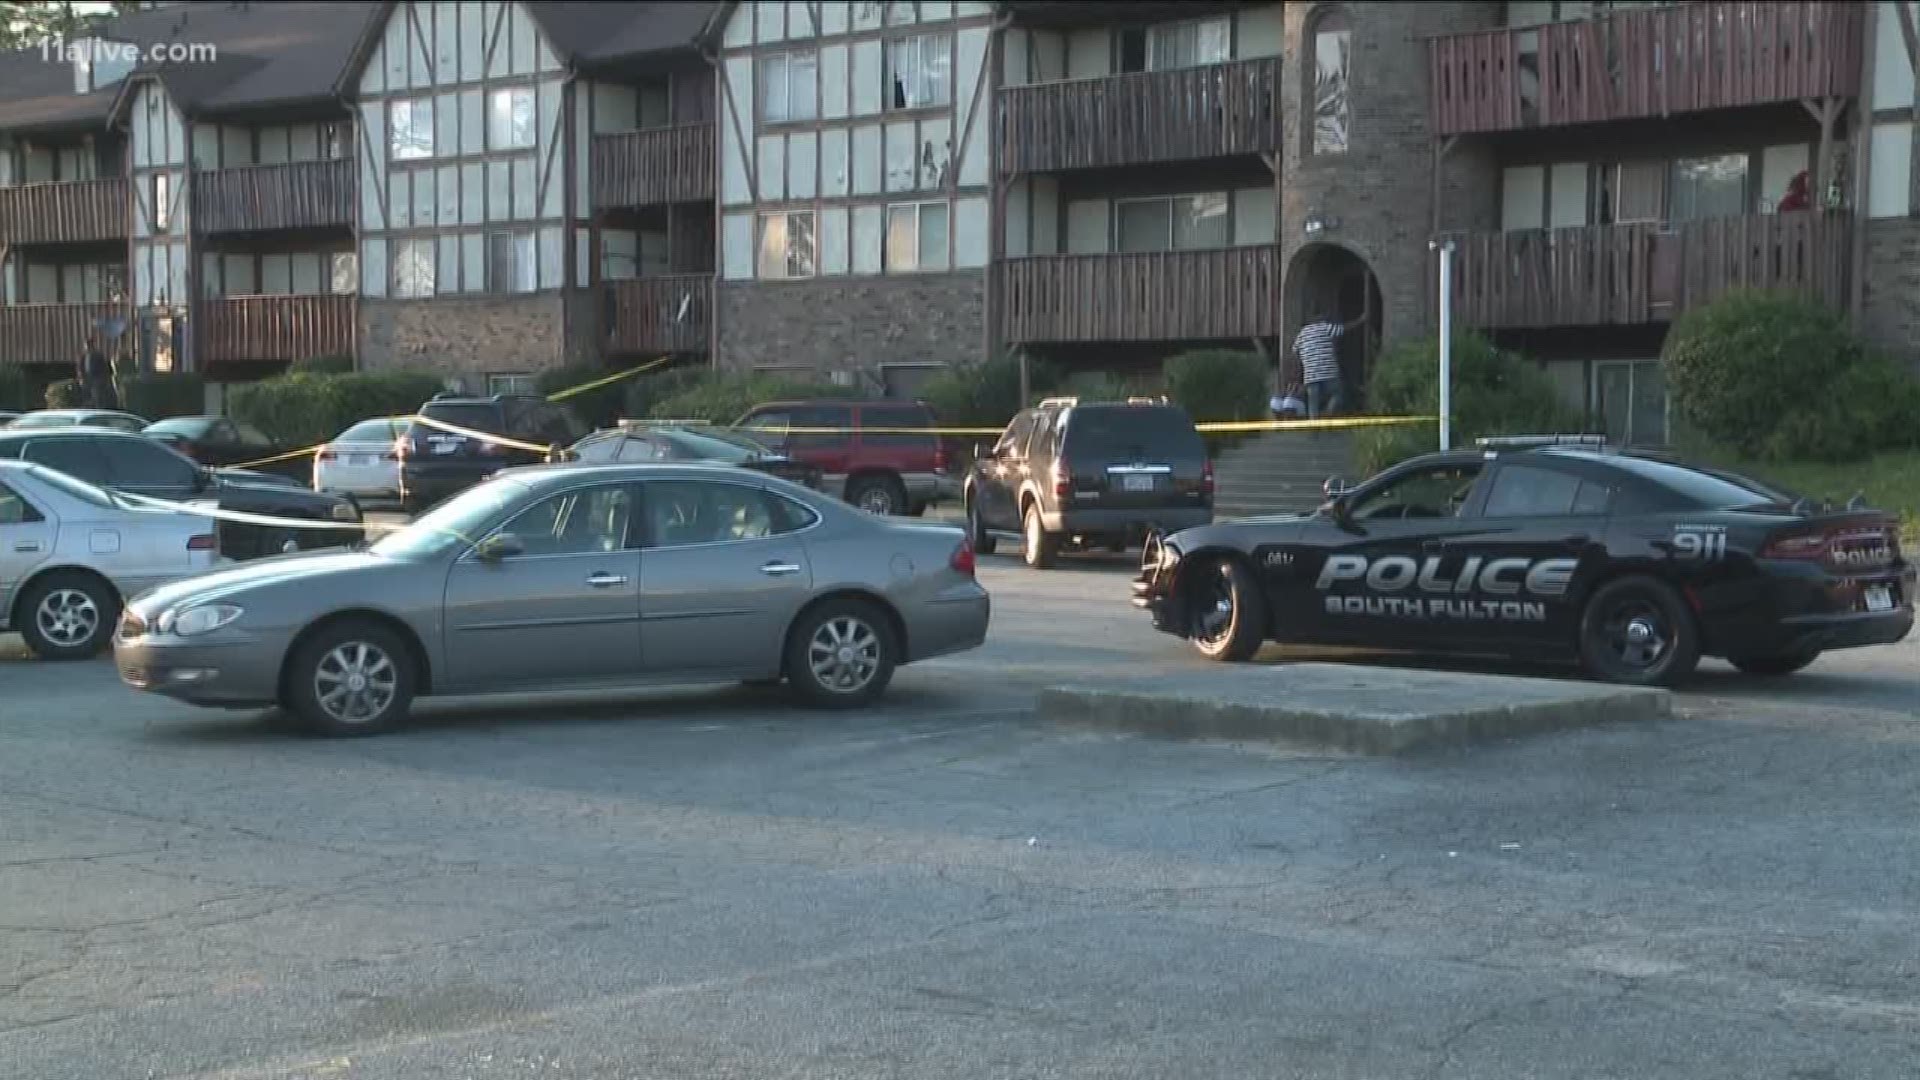 Police are investigating after they found a man shot to death in south Fulton County.